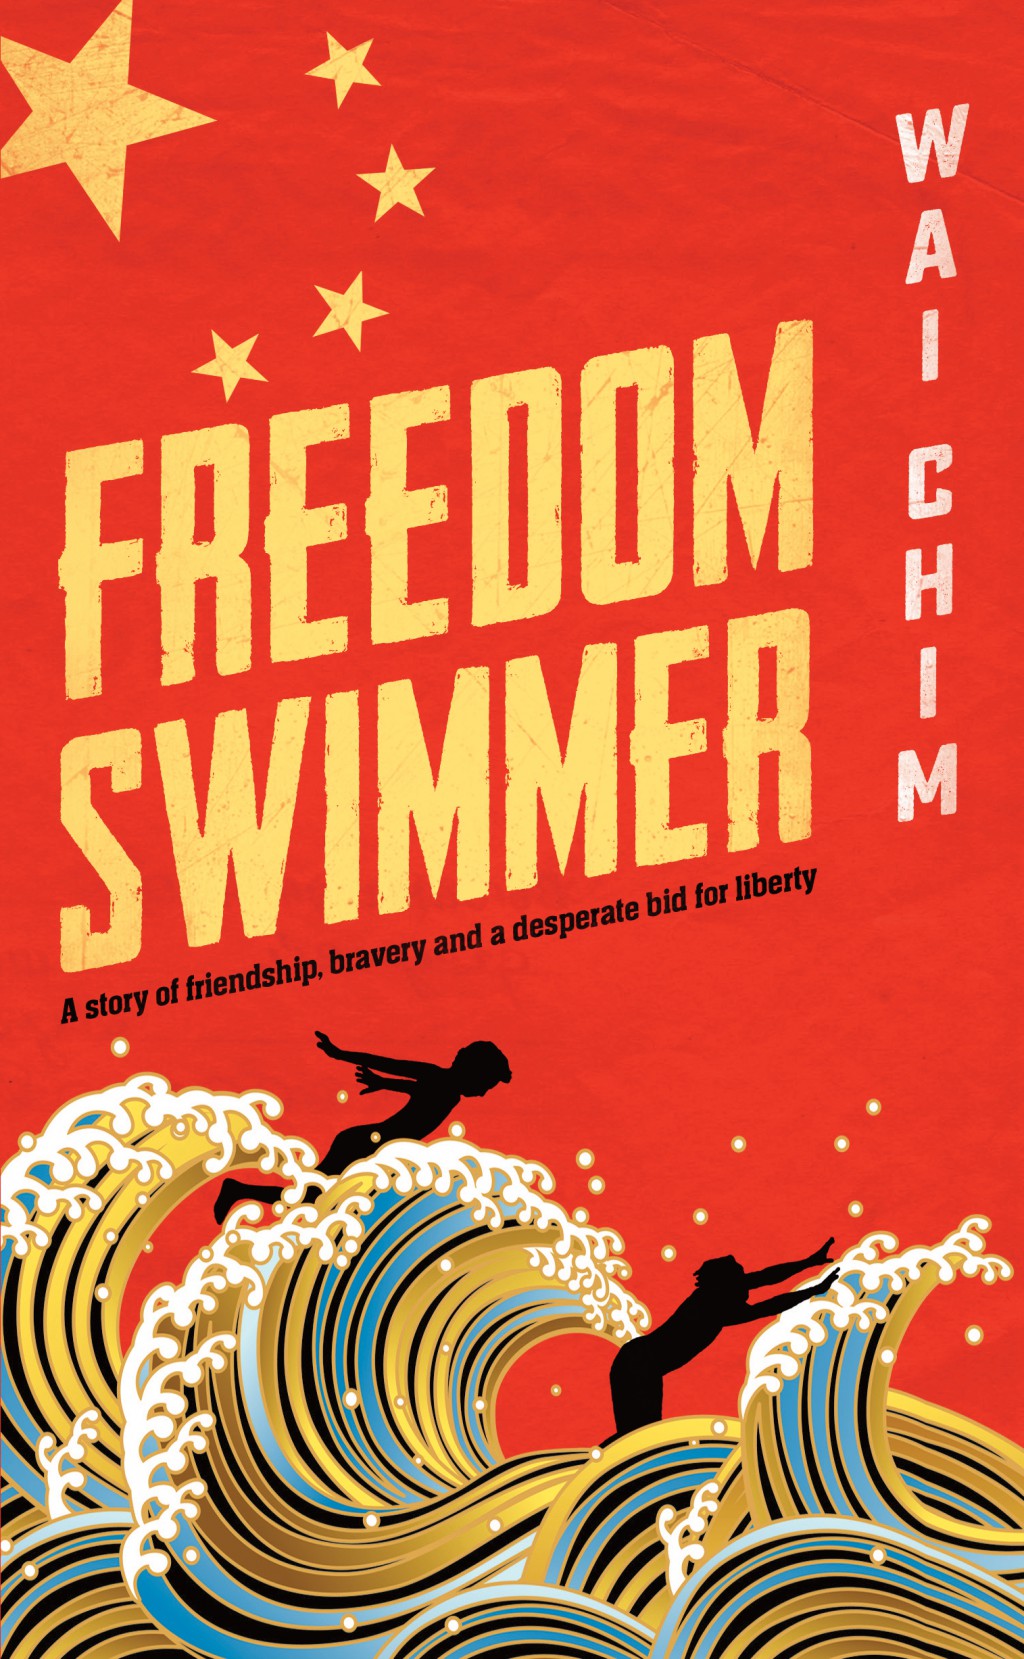 Opinion  From 'freedom swimmers' fleeing China to fears of Hong